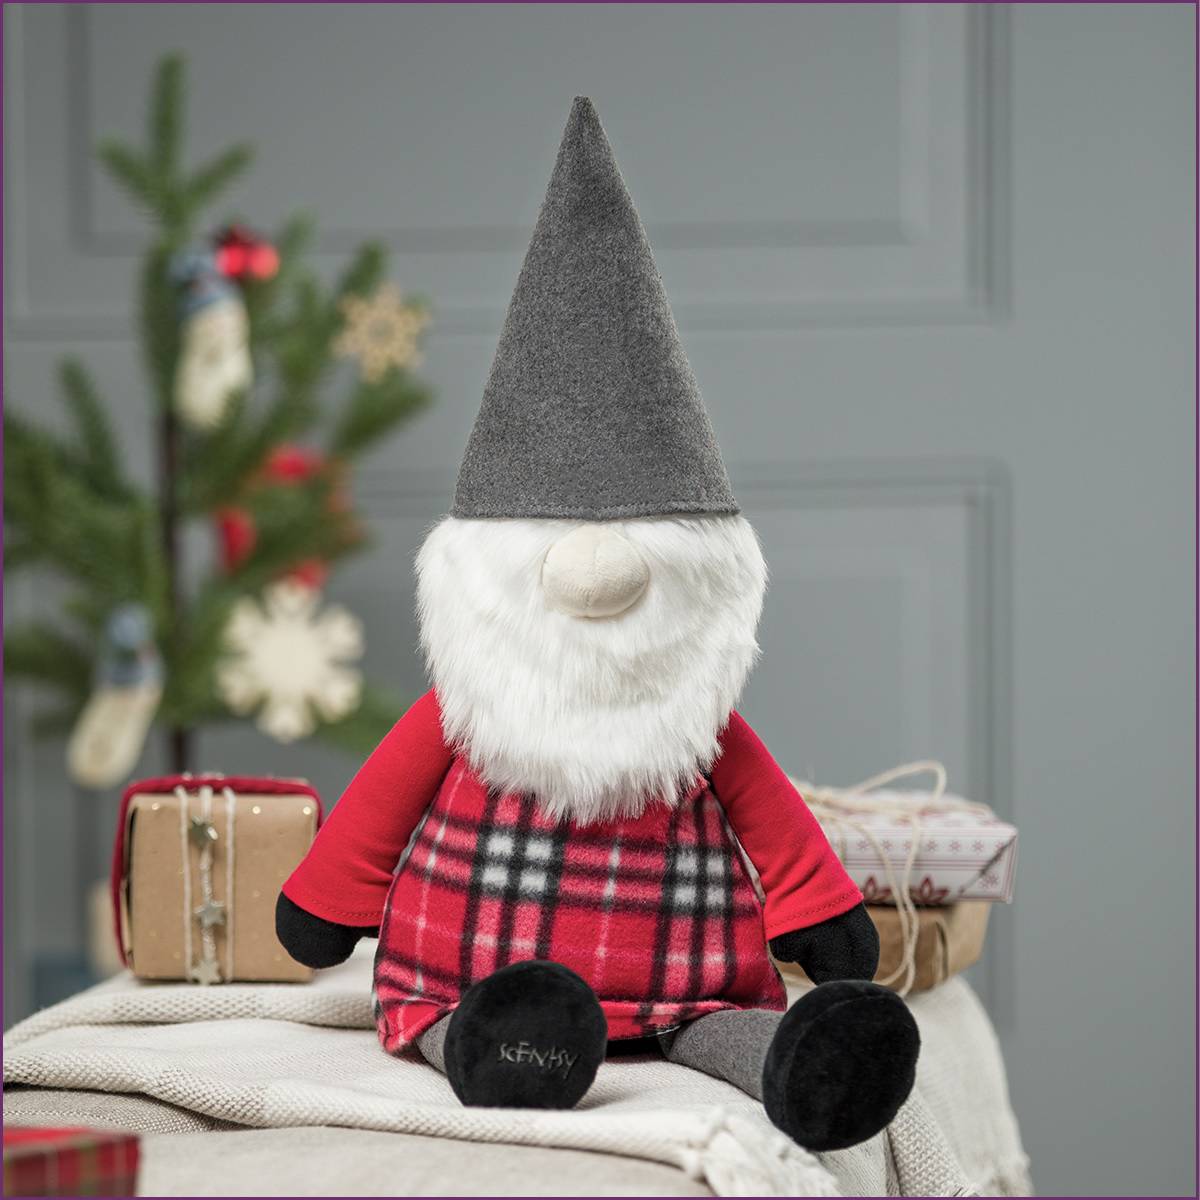 Gnordy the Gnome Scentsy Buddy | Staged